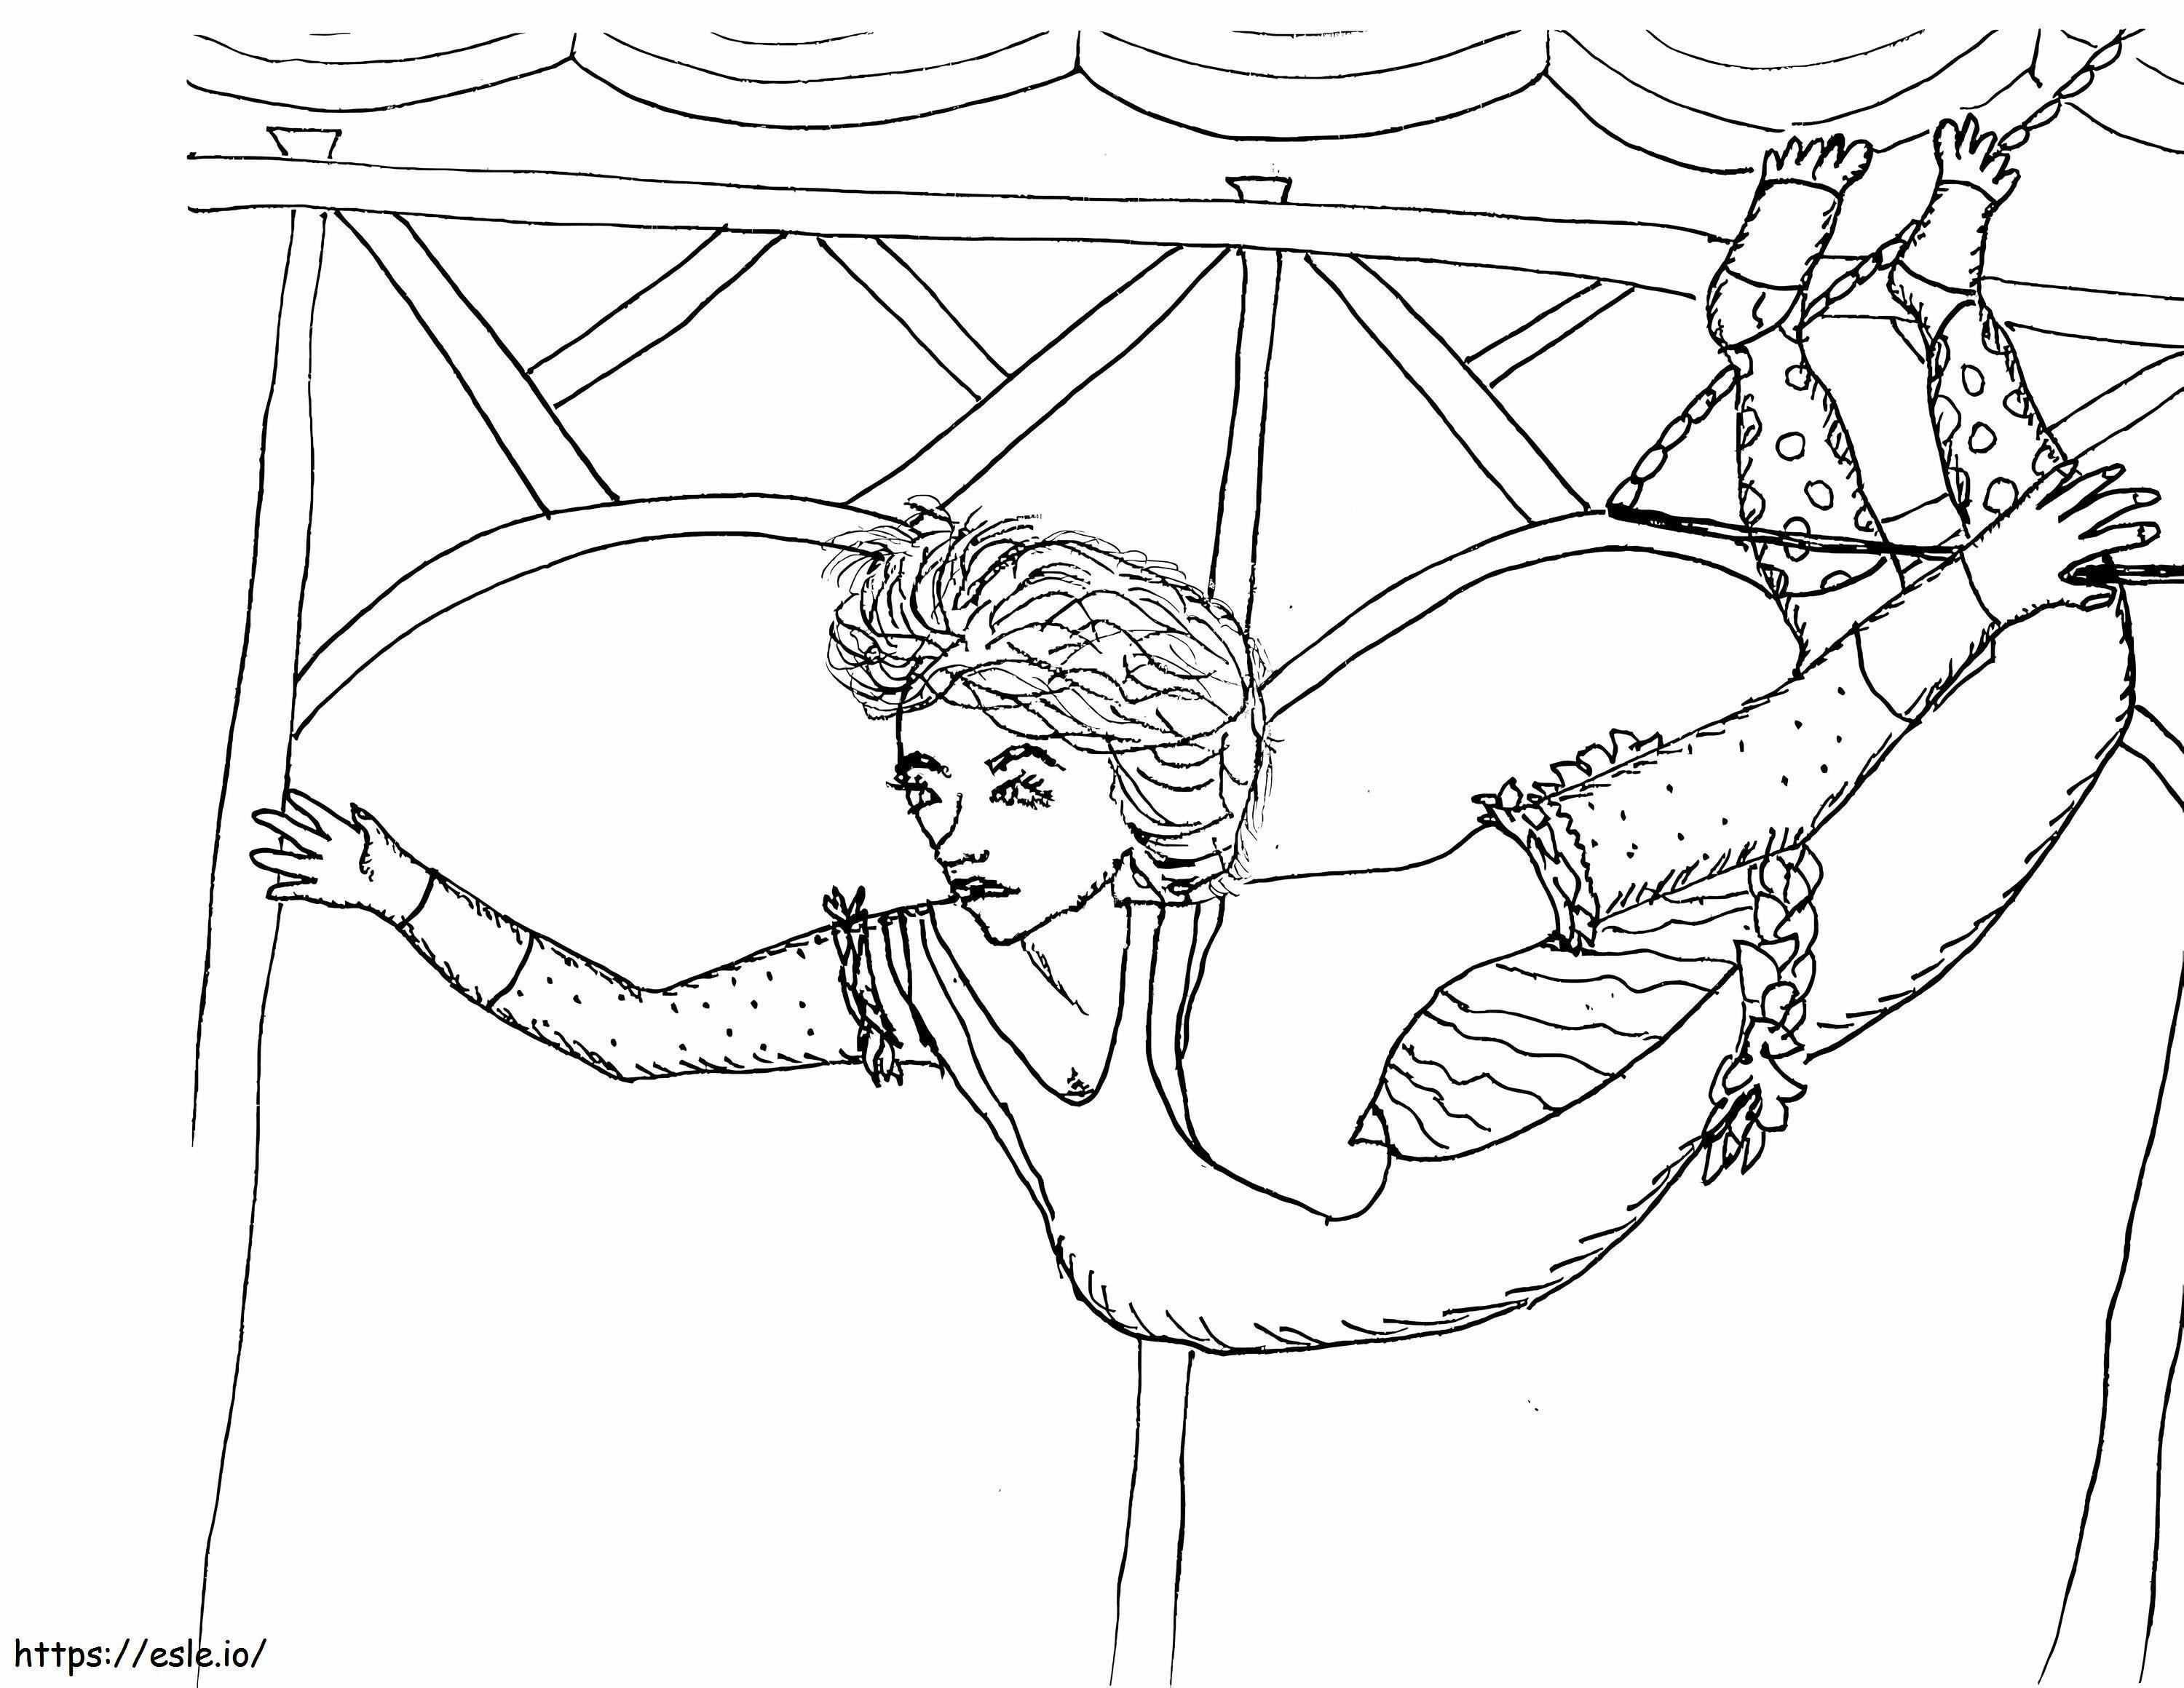 The Greatest Showman 6 coloring page